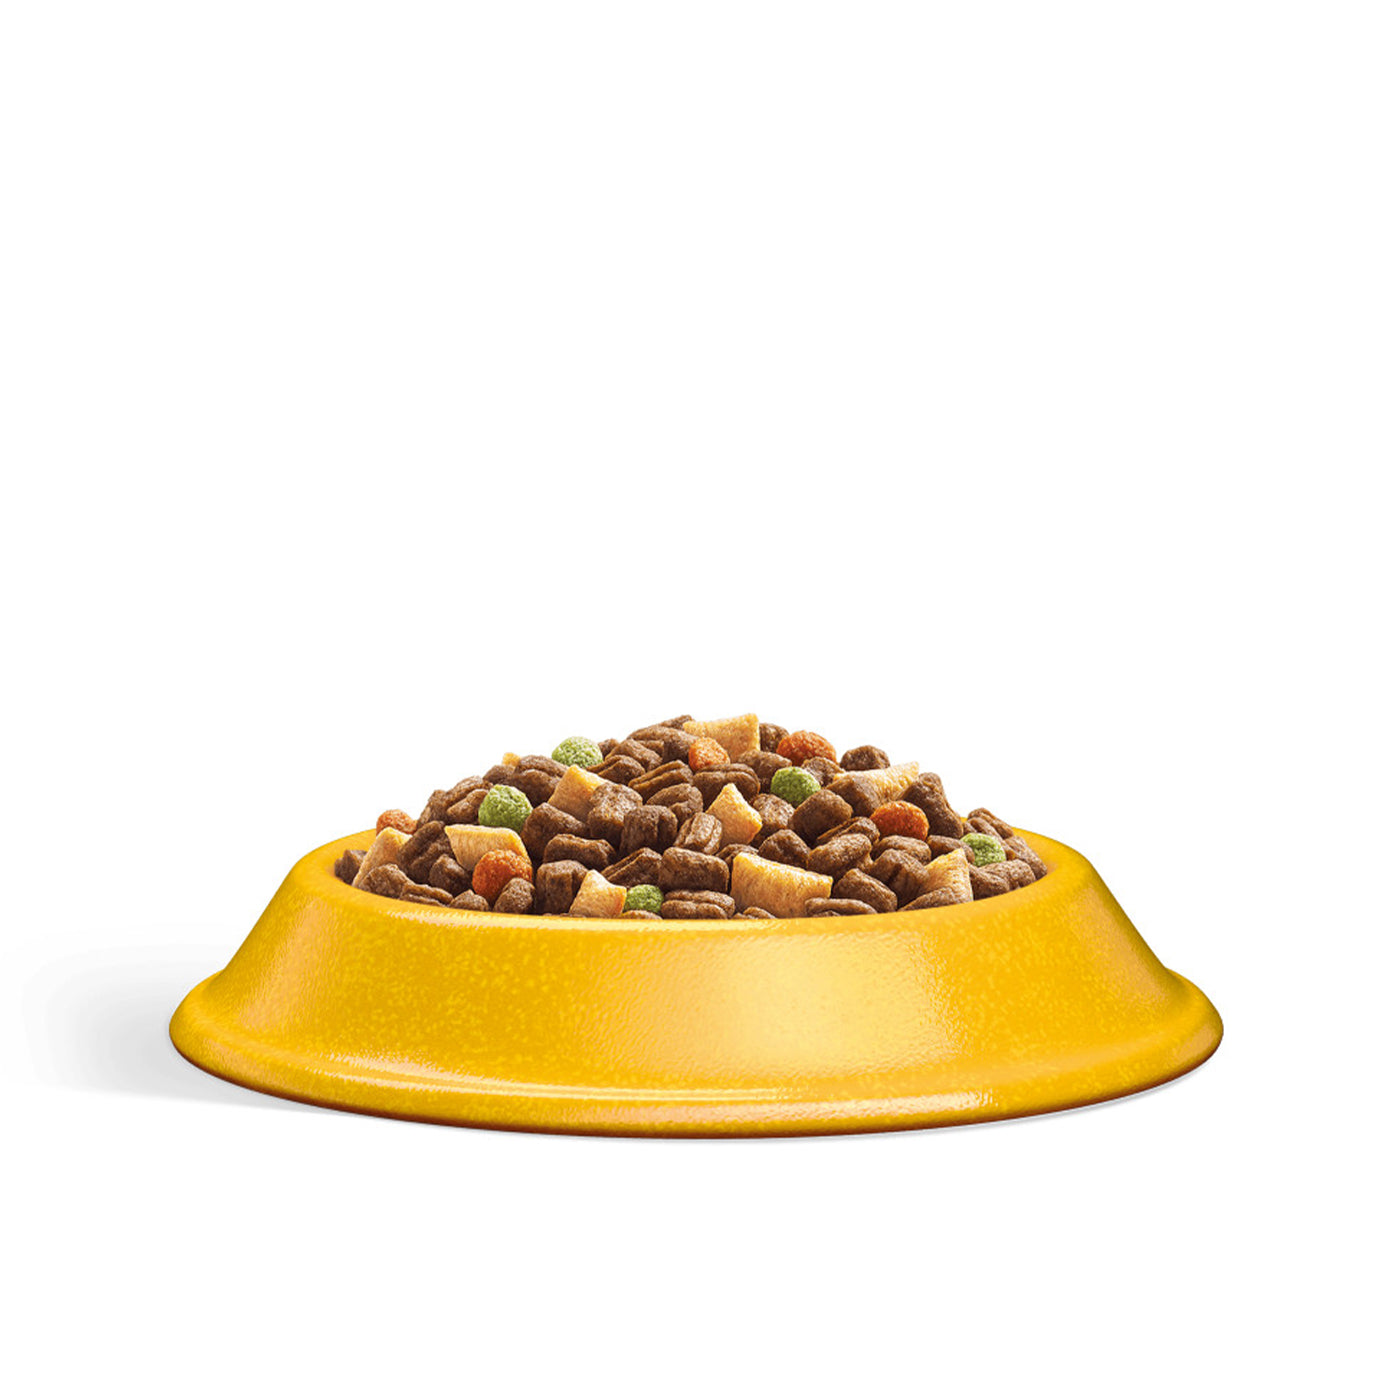 Whiskas 1+ Cat Complete Dry Food with Chicken